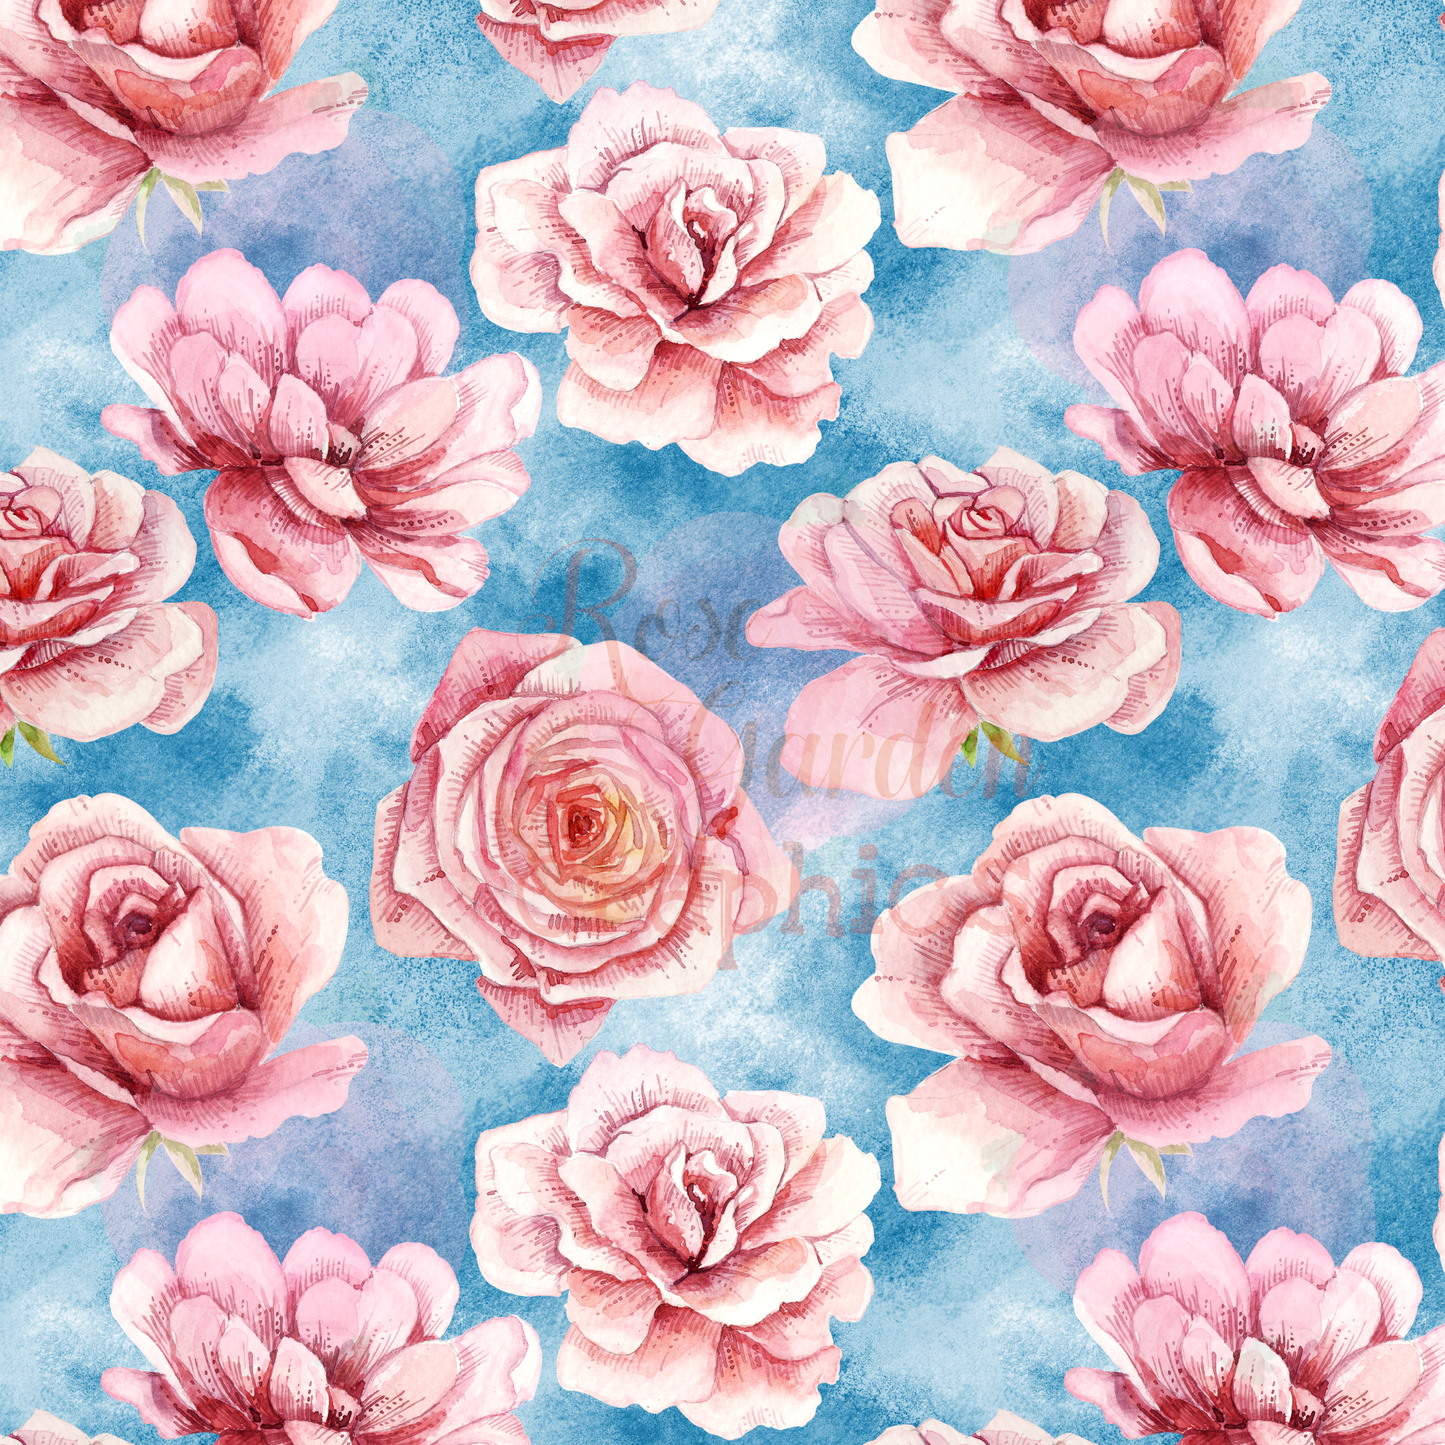 Delicate Roses Seamless Image